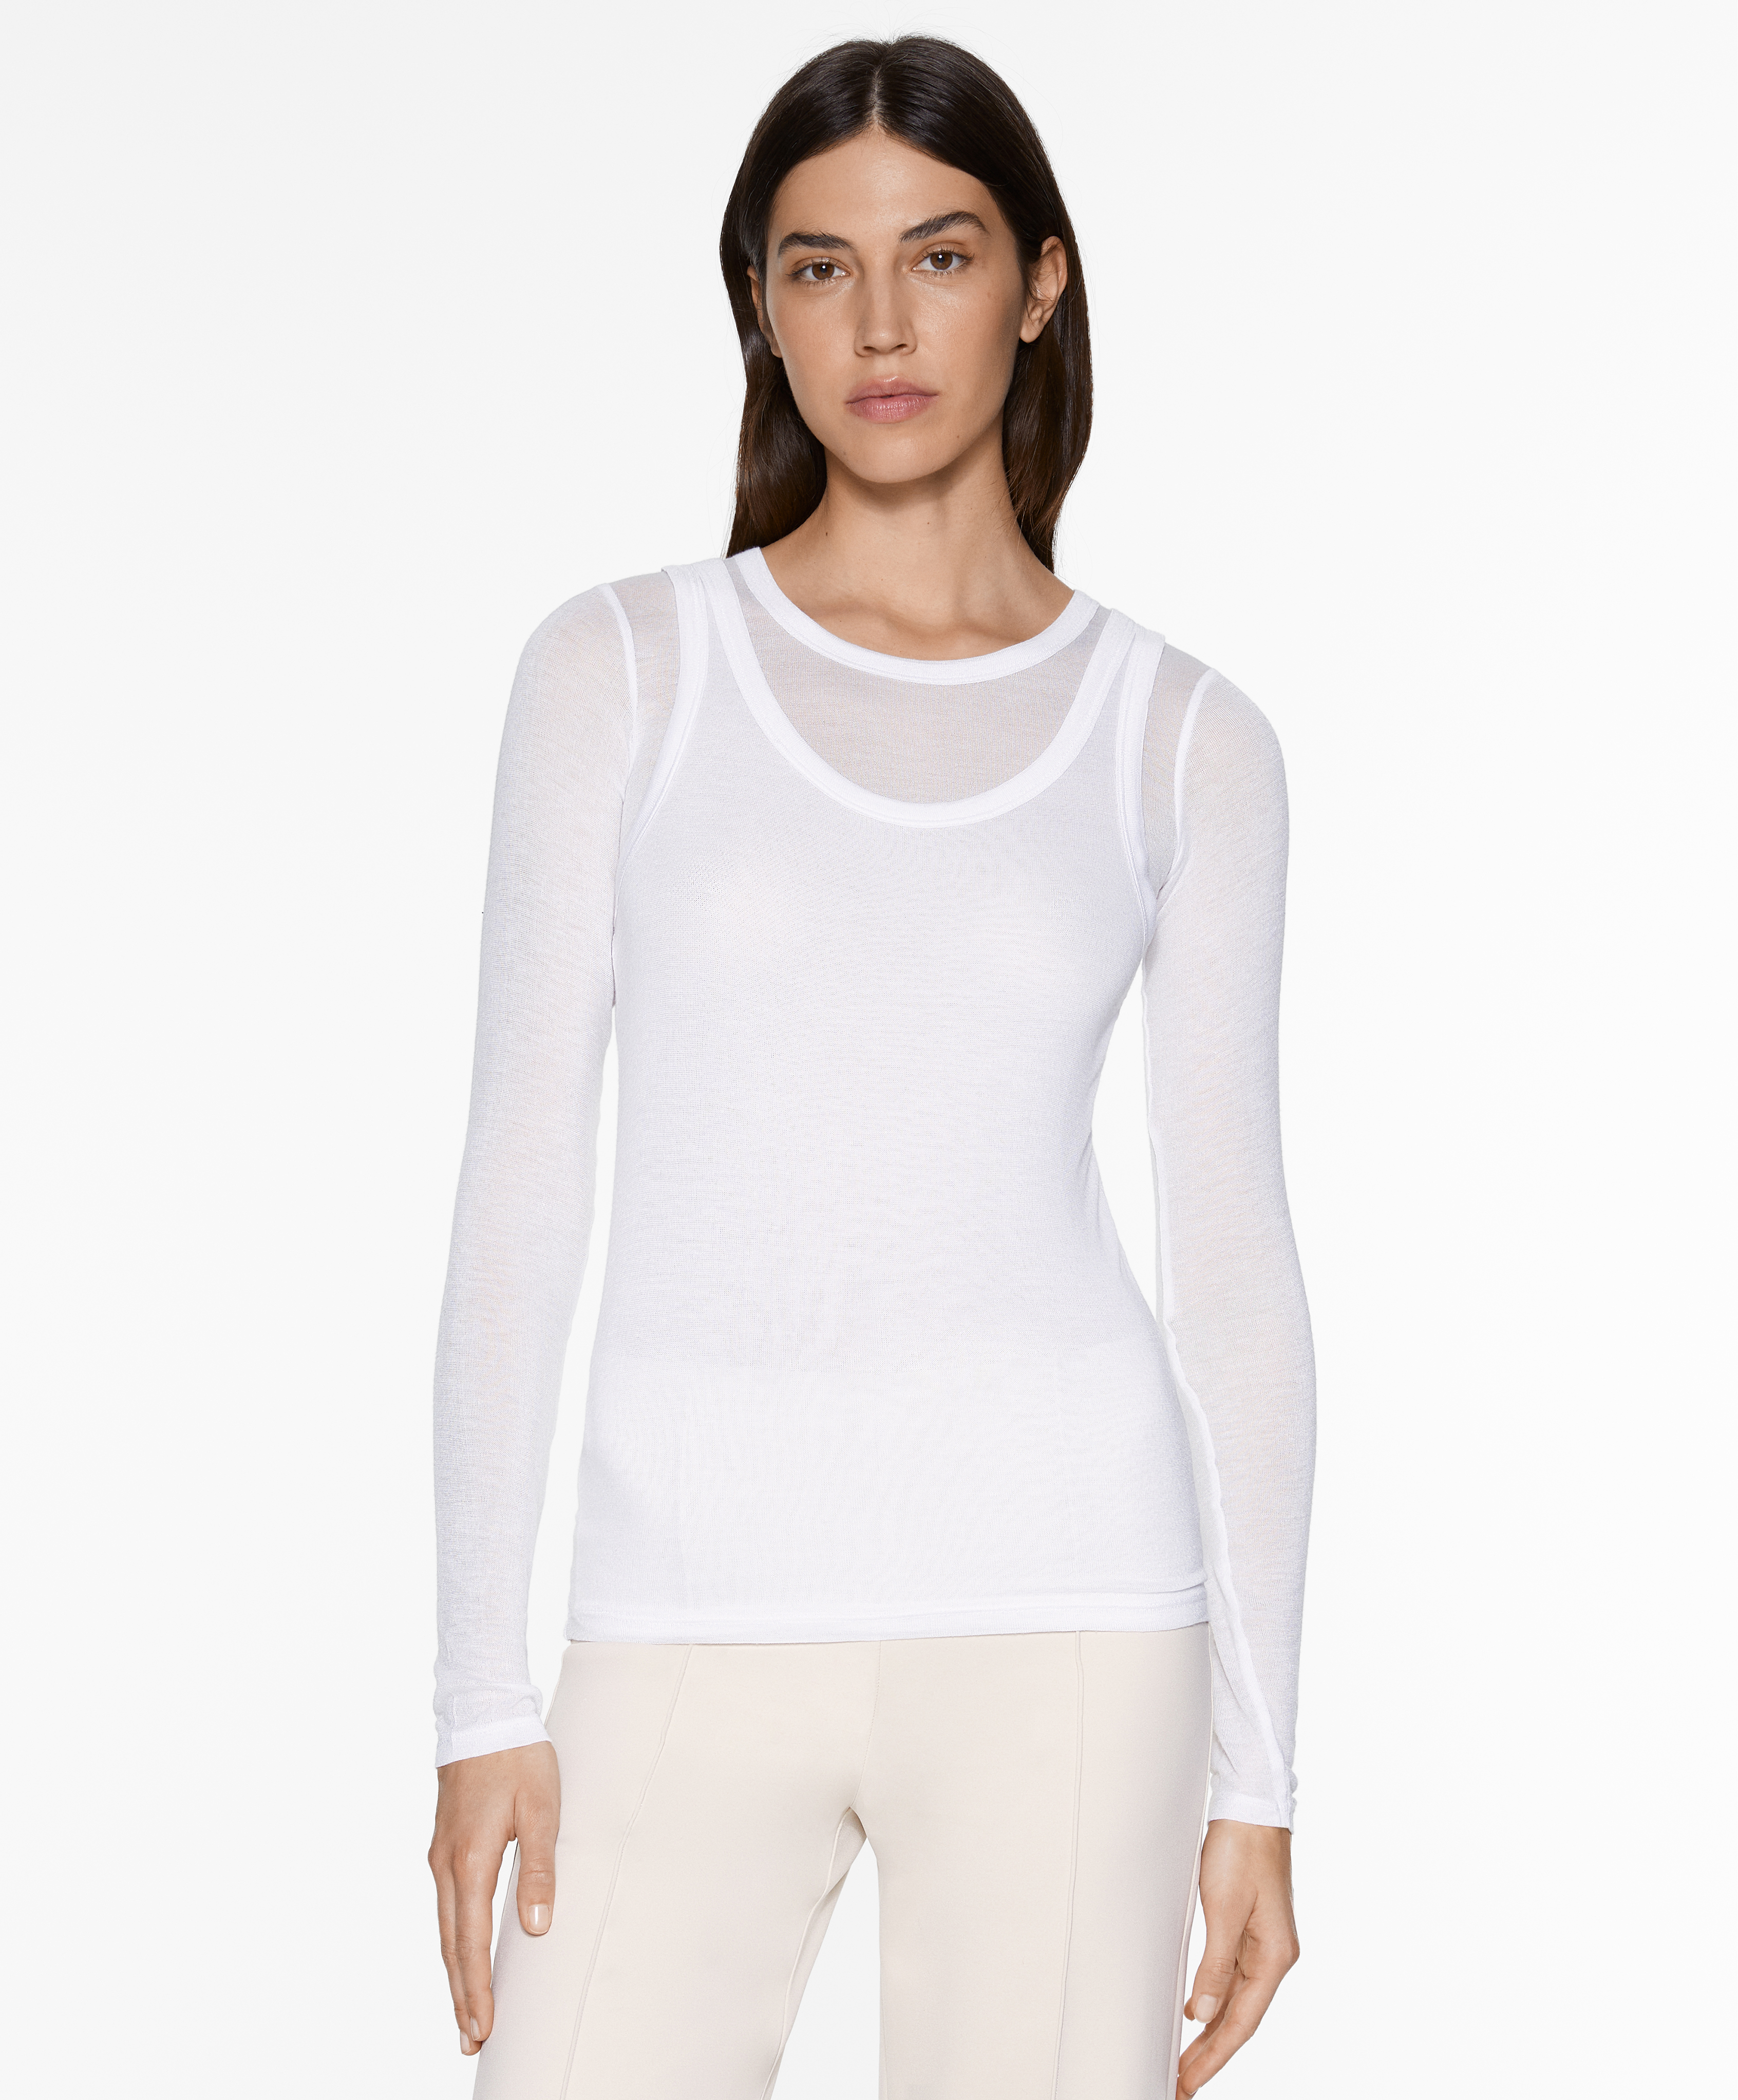 Super extra warmth long-sleeved seamless top